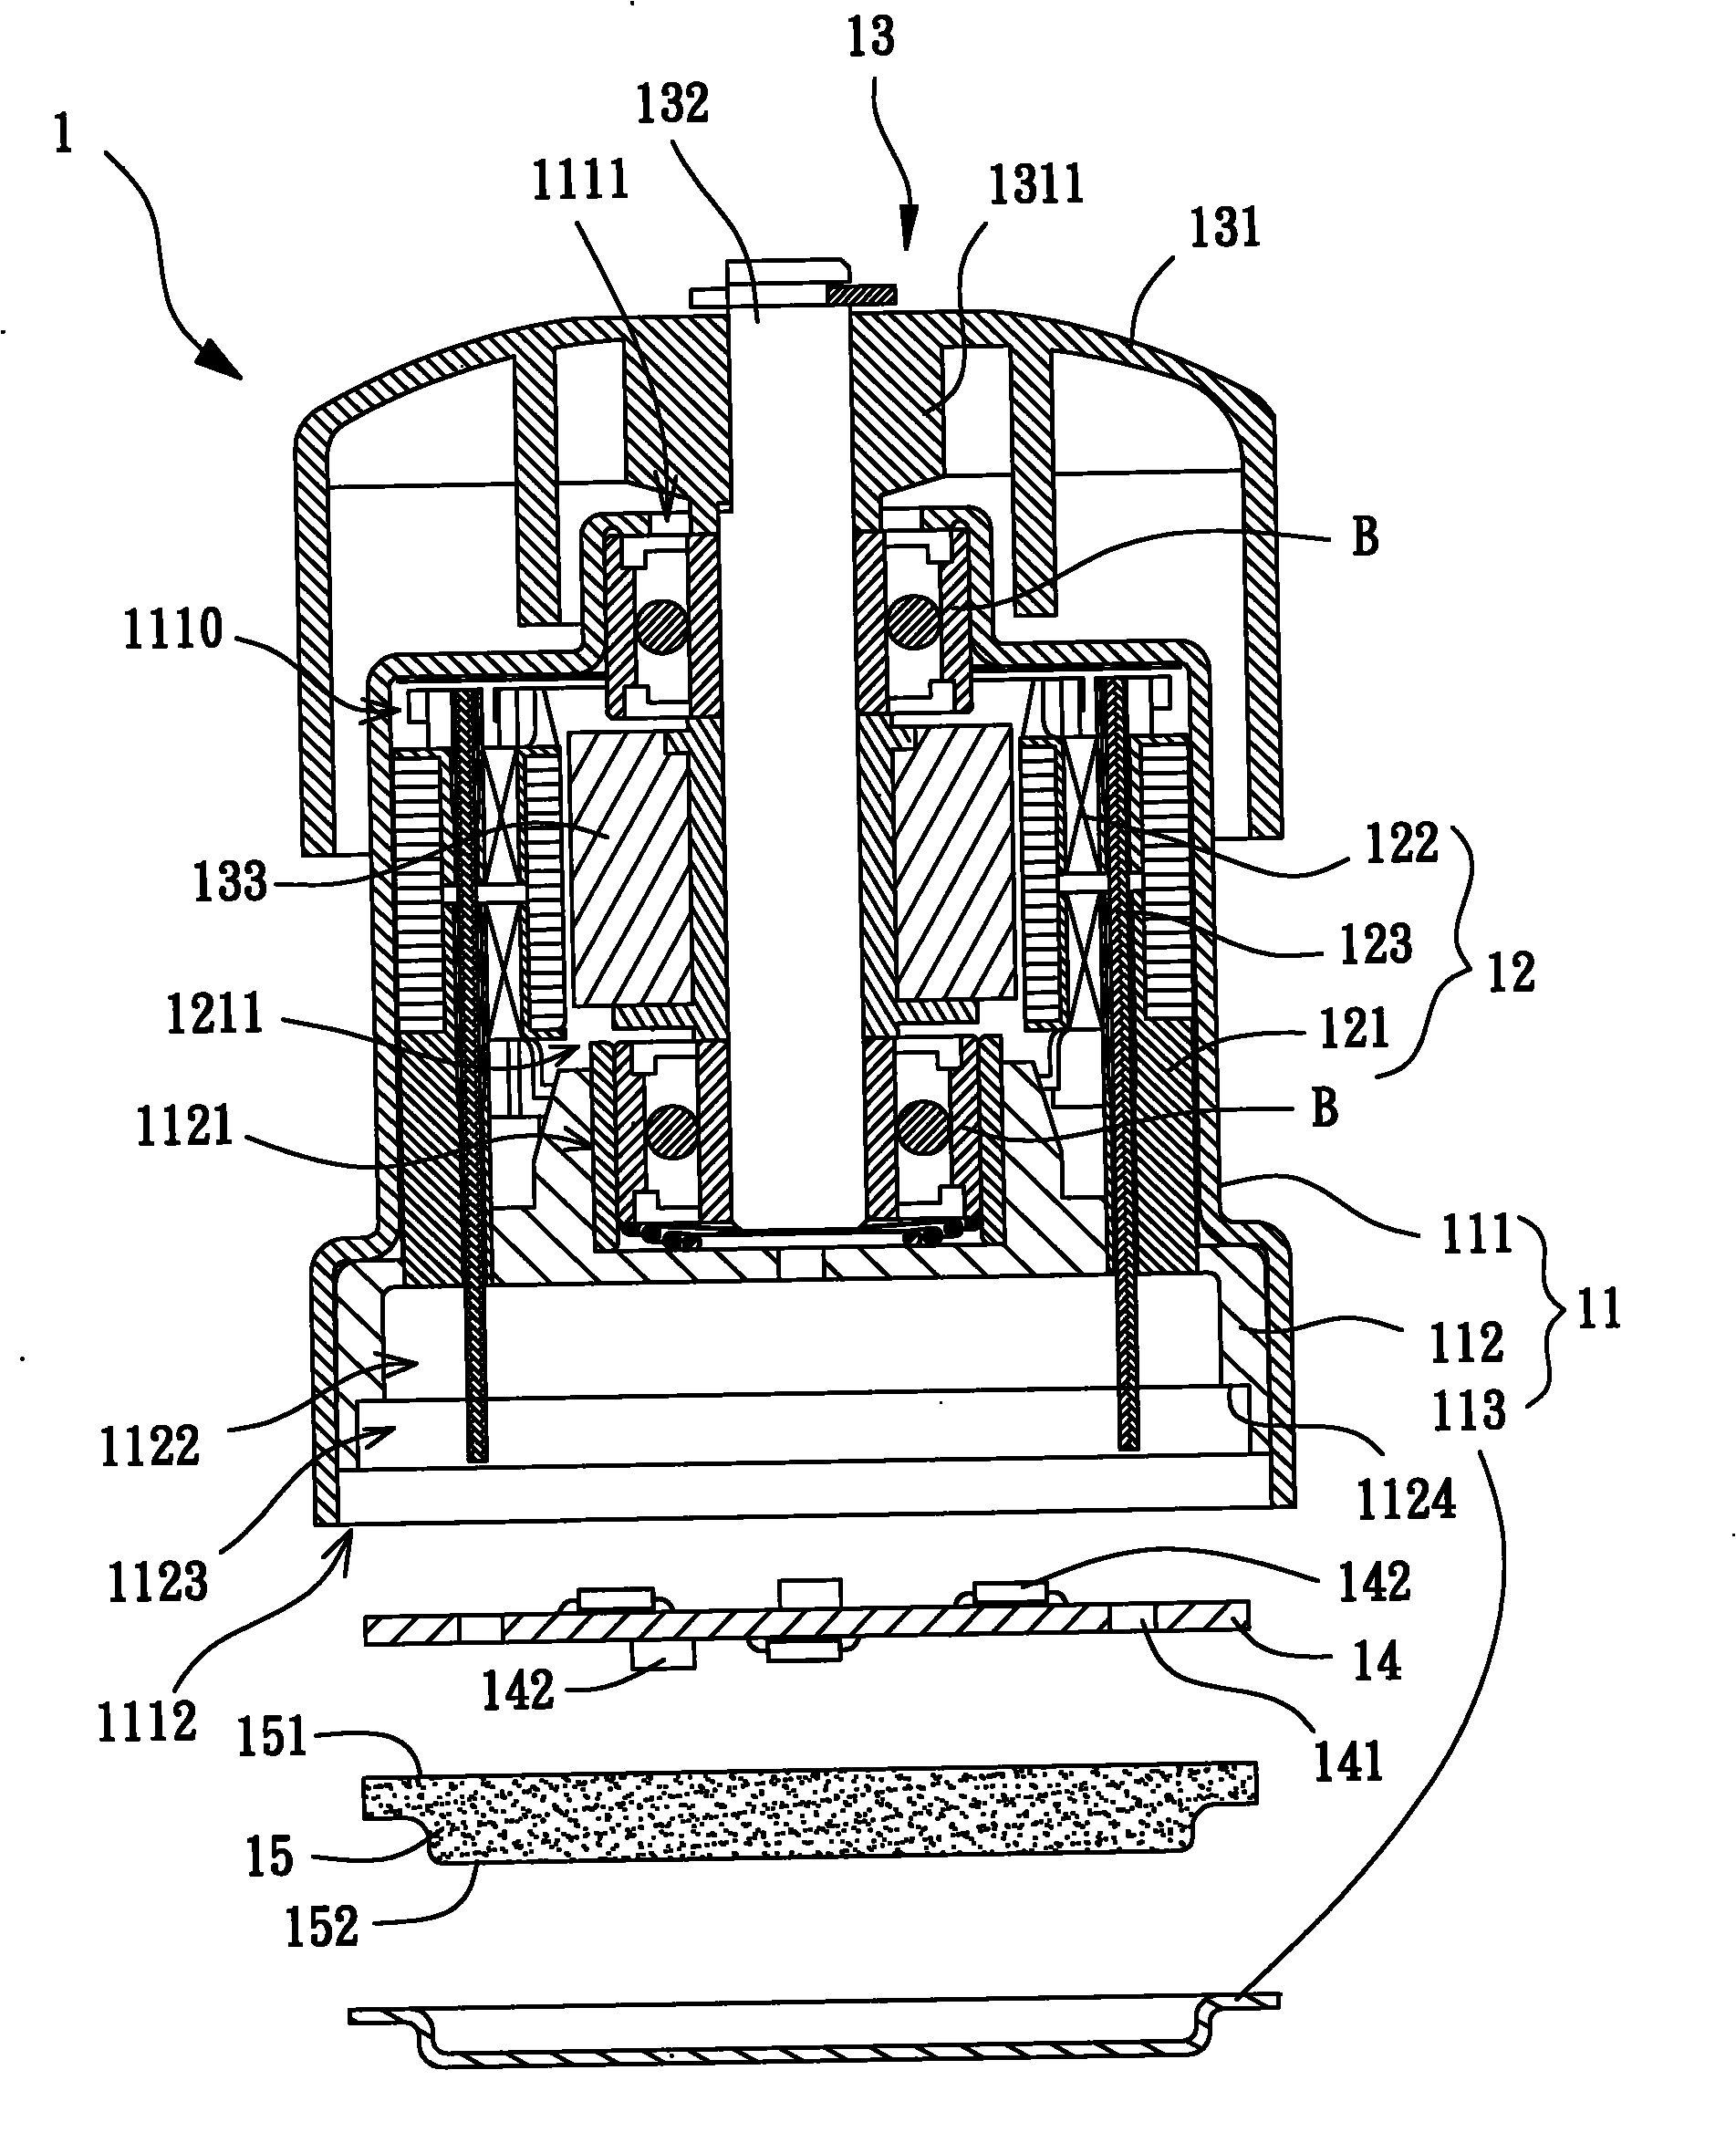 Motor and cooling fan provided with same